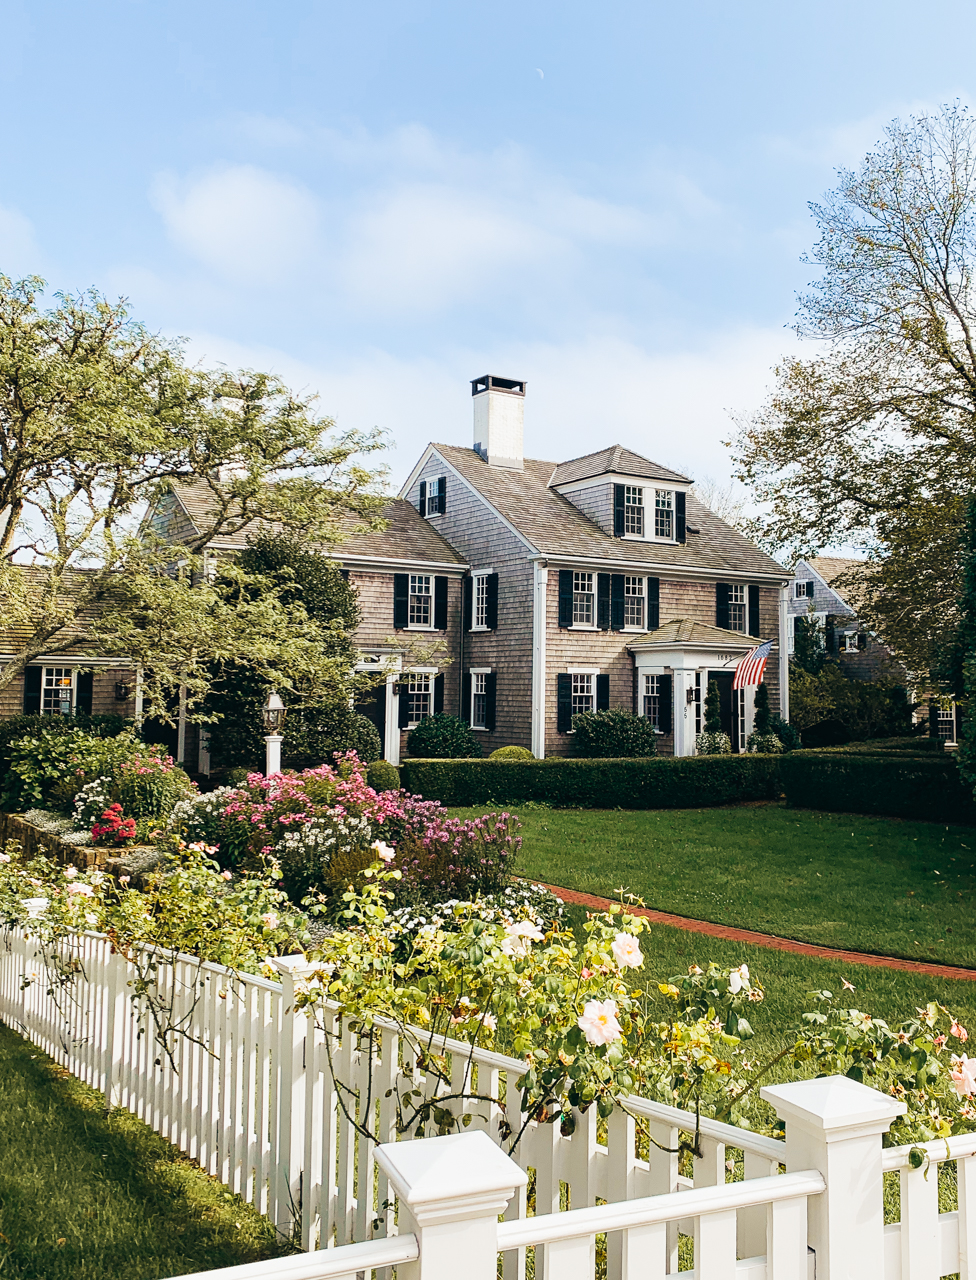 Cottage Garden Ideas by popular New England life and style blogger, Shannon Shipman: image of a colonial house with grey shingle siding and a white picket fence lined with various flowers. 